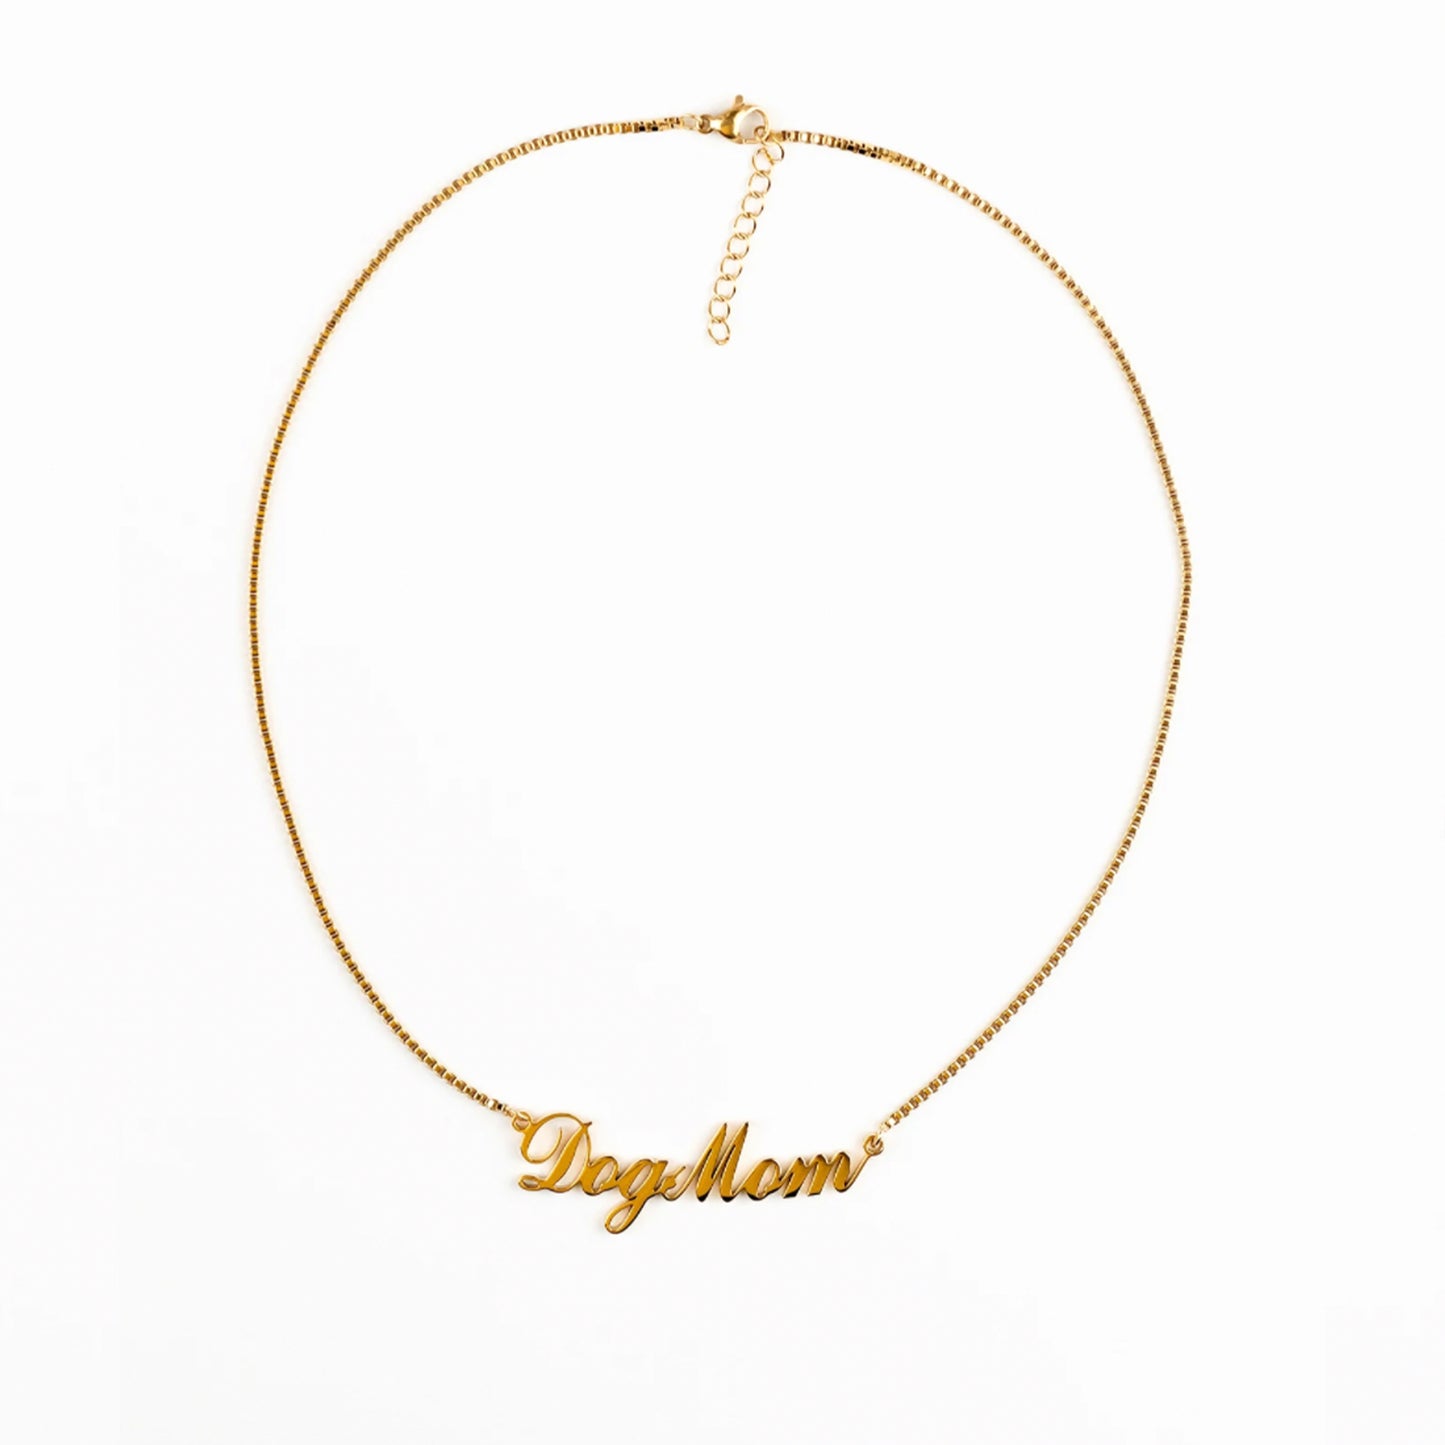  Word Necklaces. Adjustable 14-16" gold plated necklace perfect for layering!